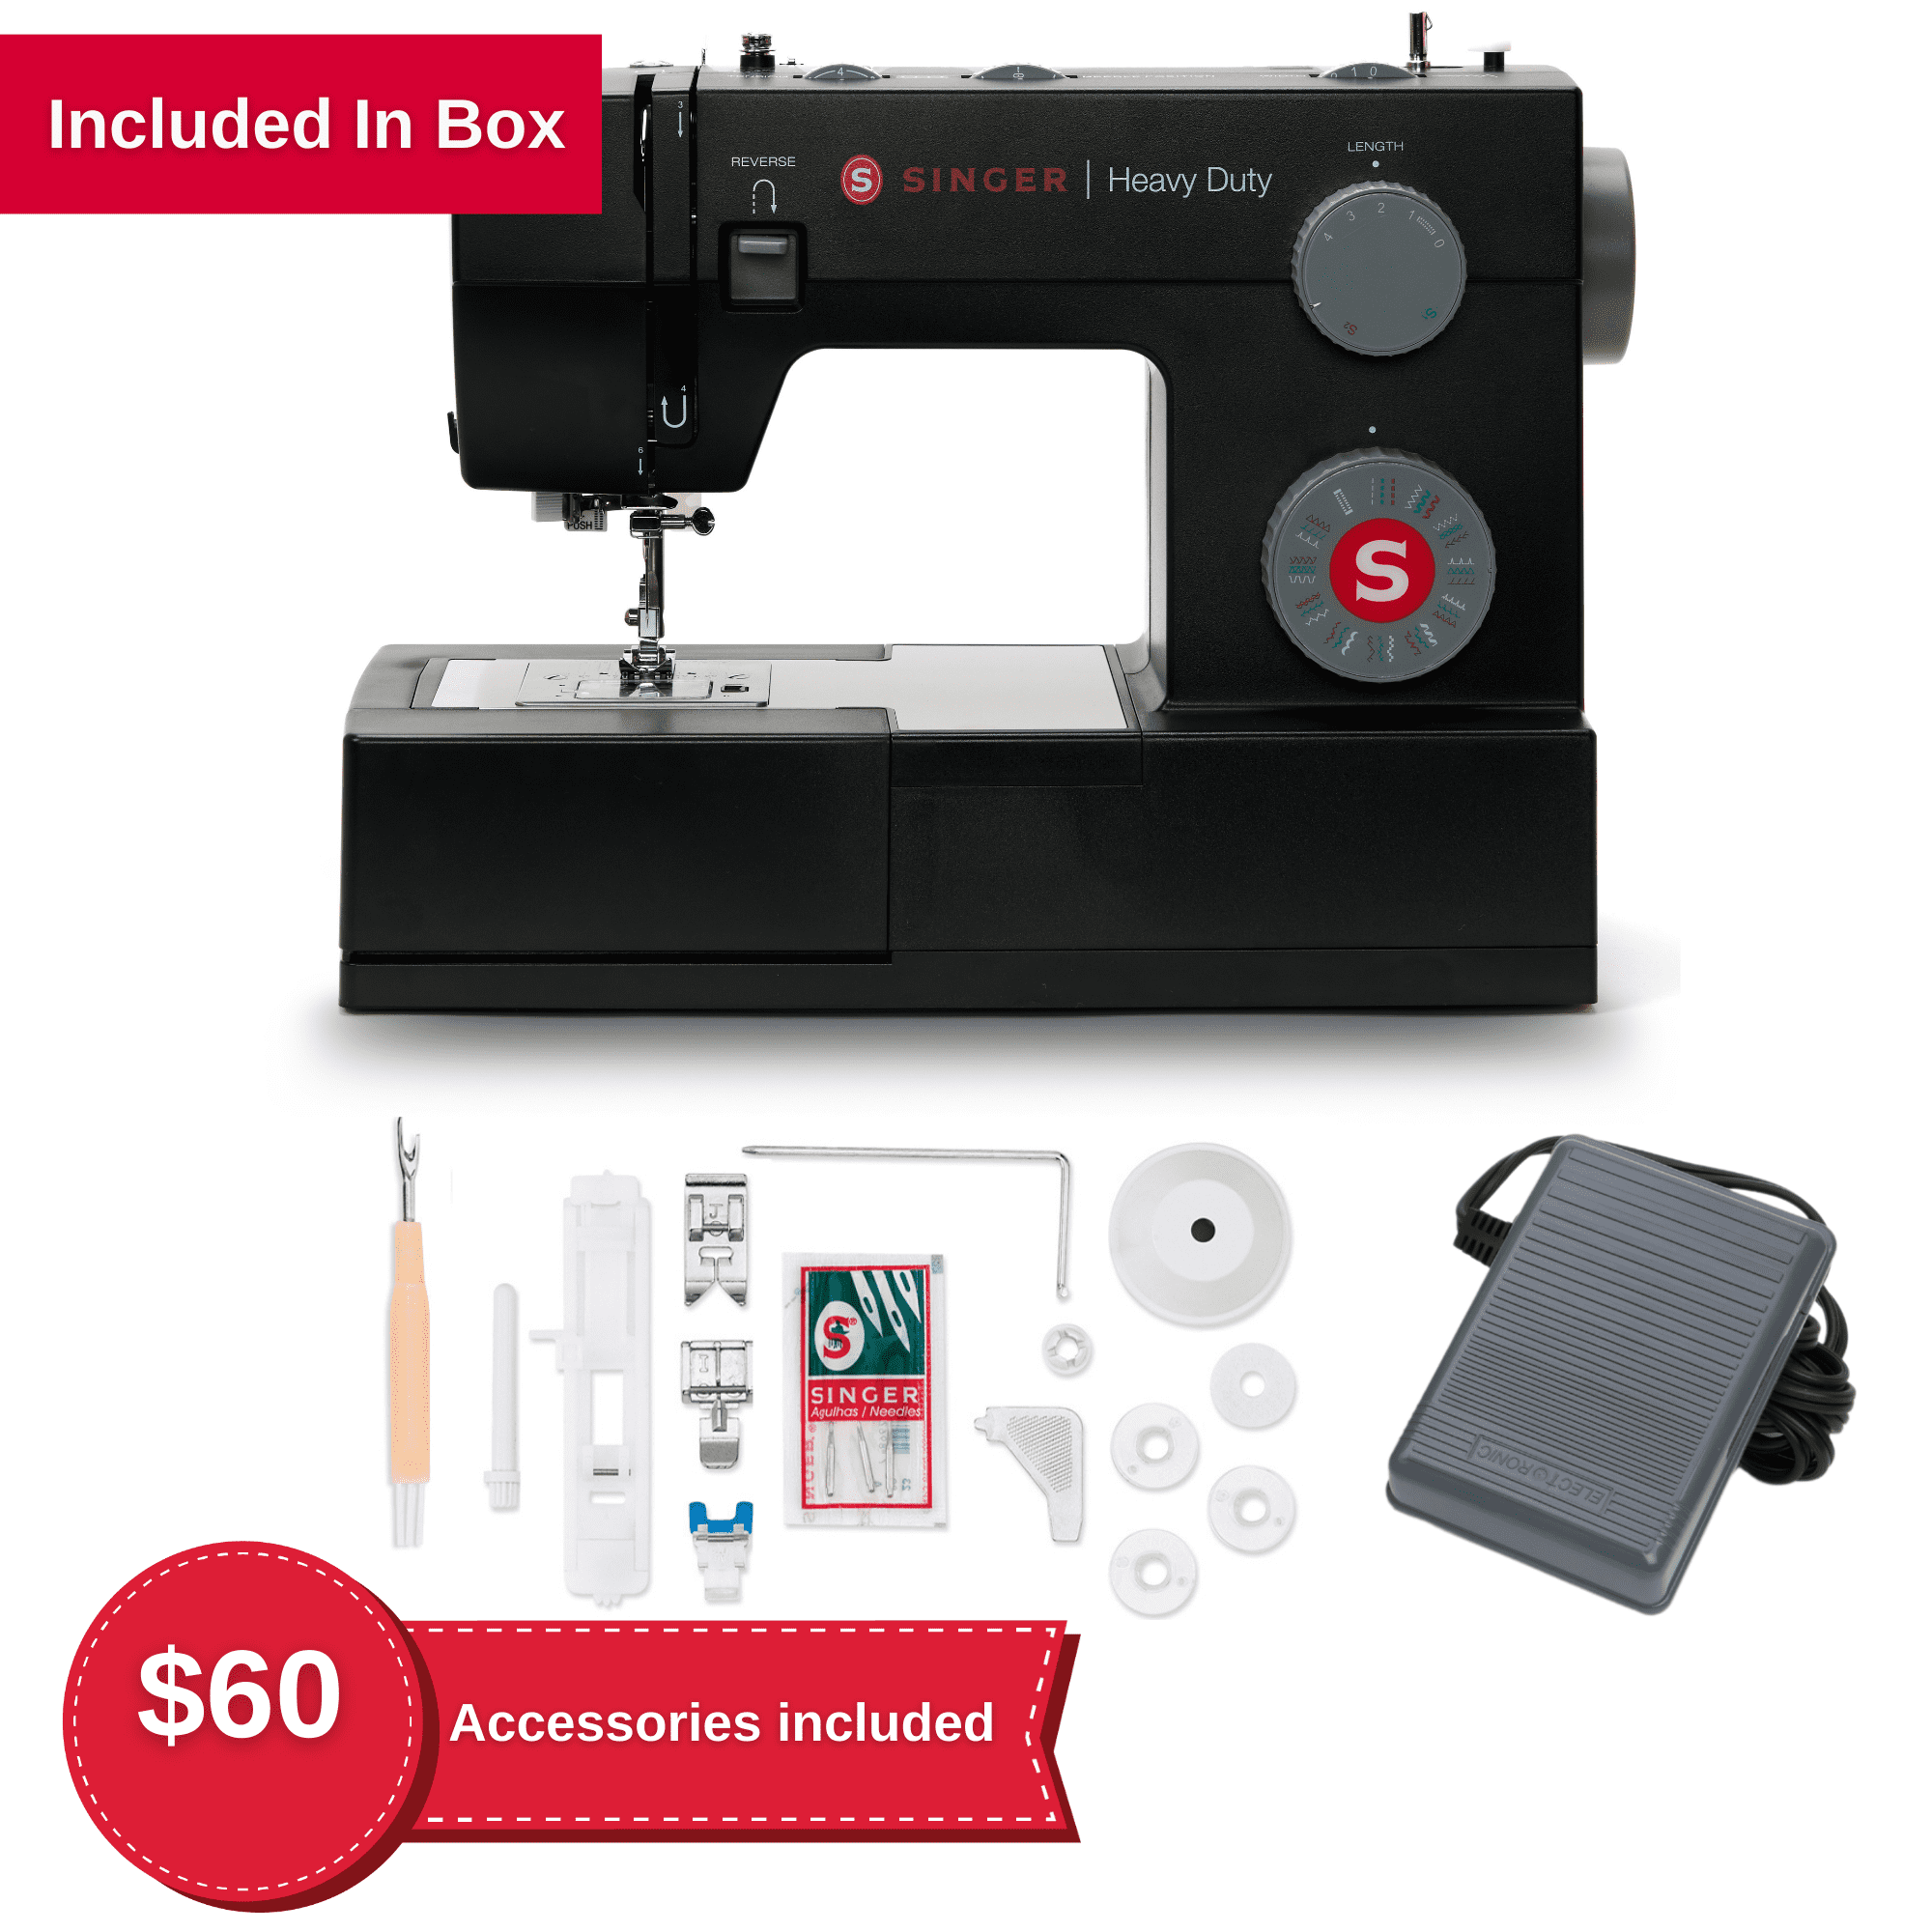 SINGER Heavy Duty 4452 Sewing Machine with Accessories 